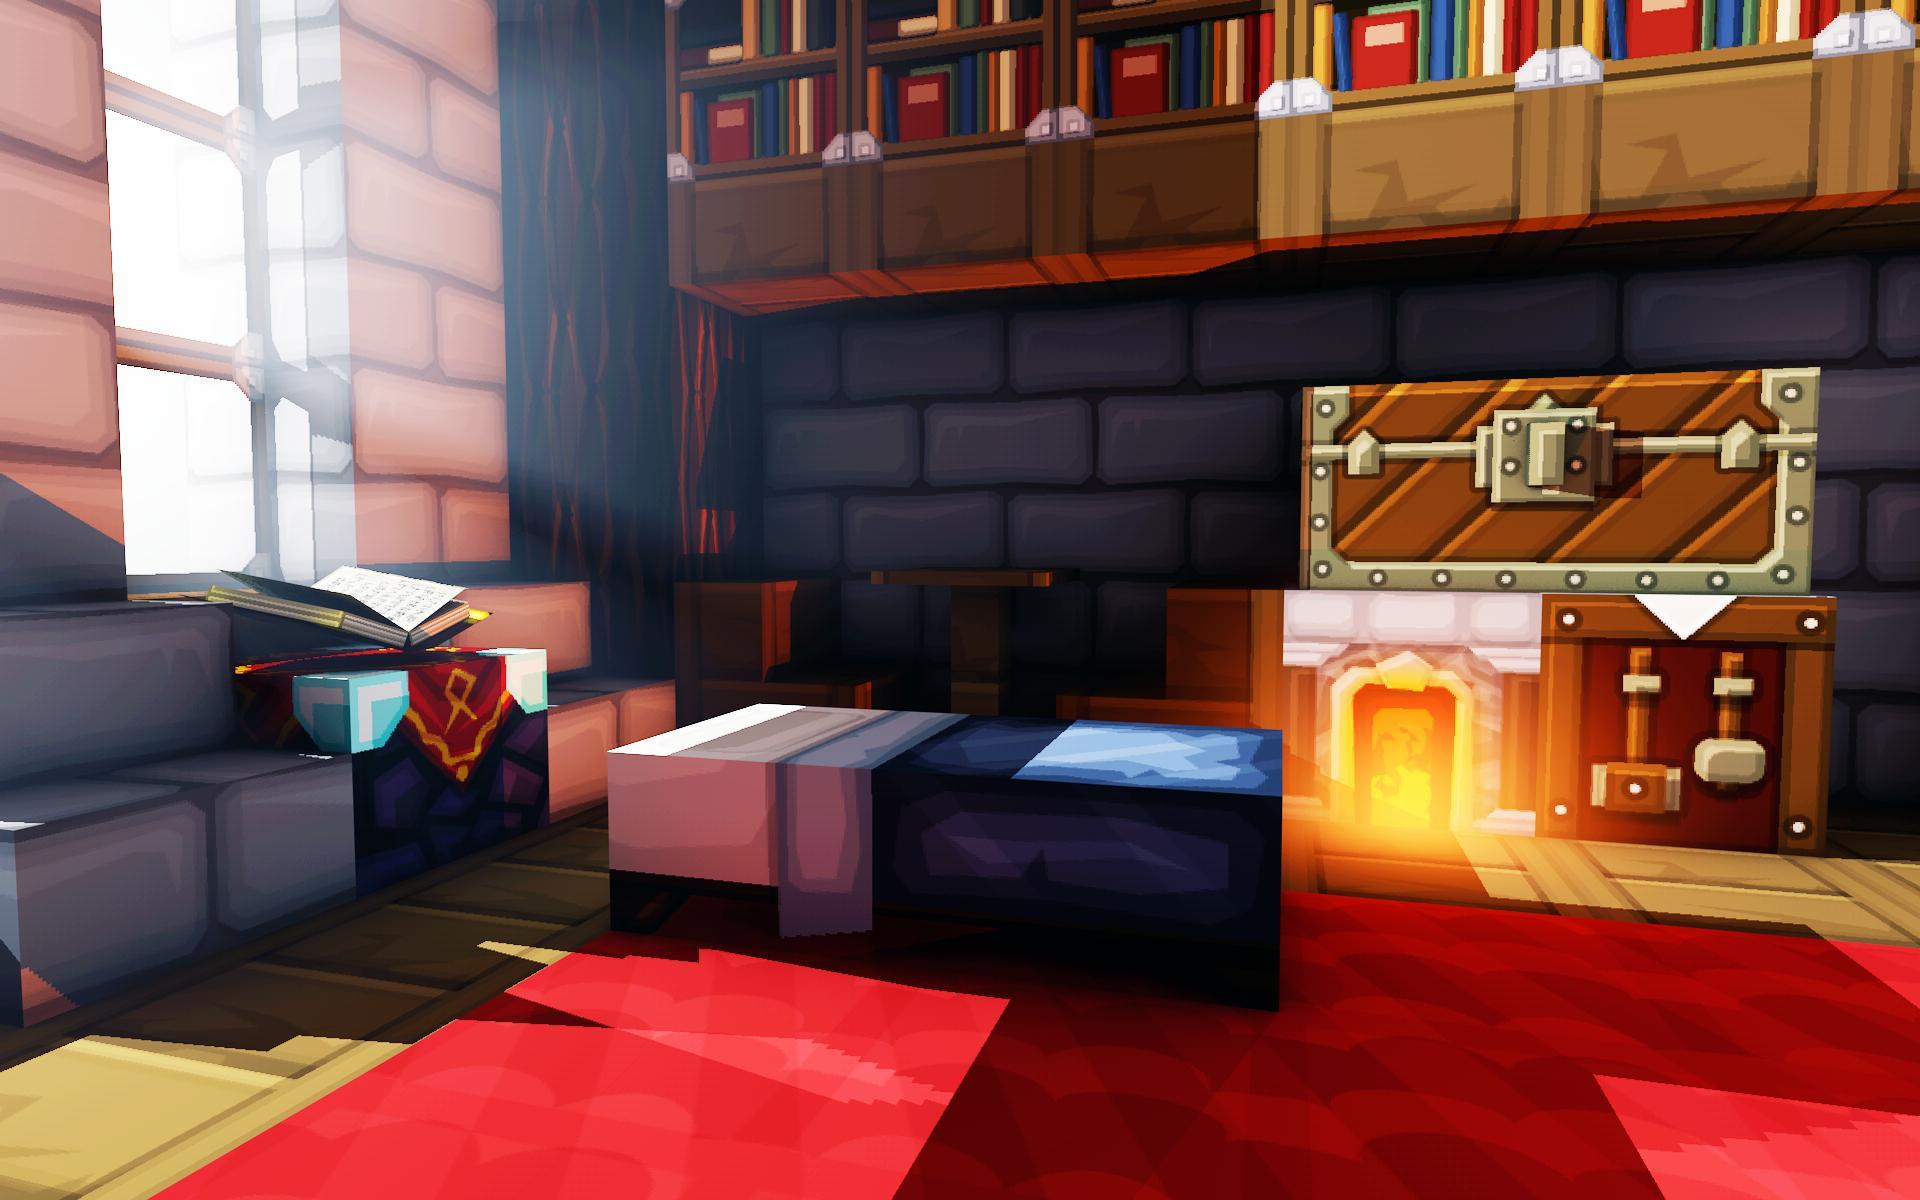 Minecraft Wallpaper for Rooms